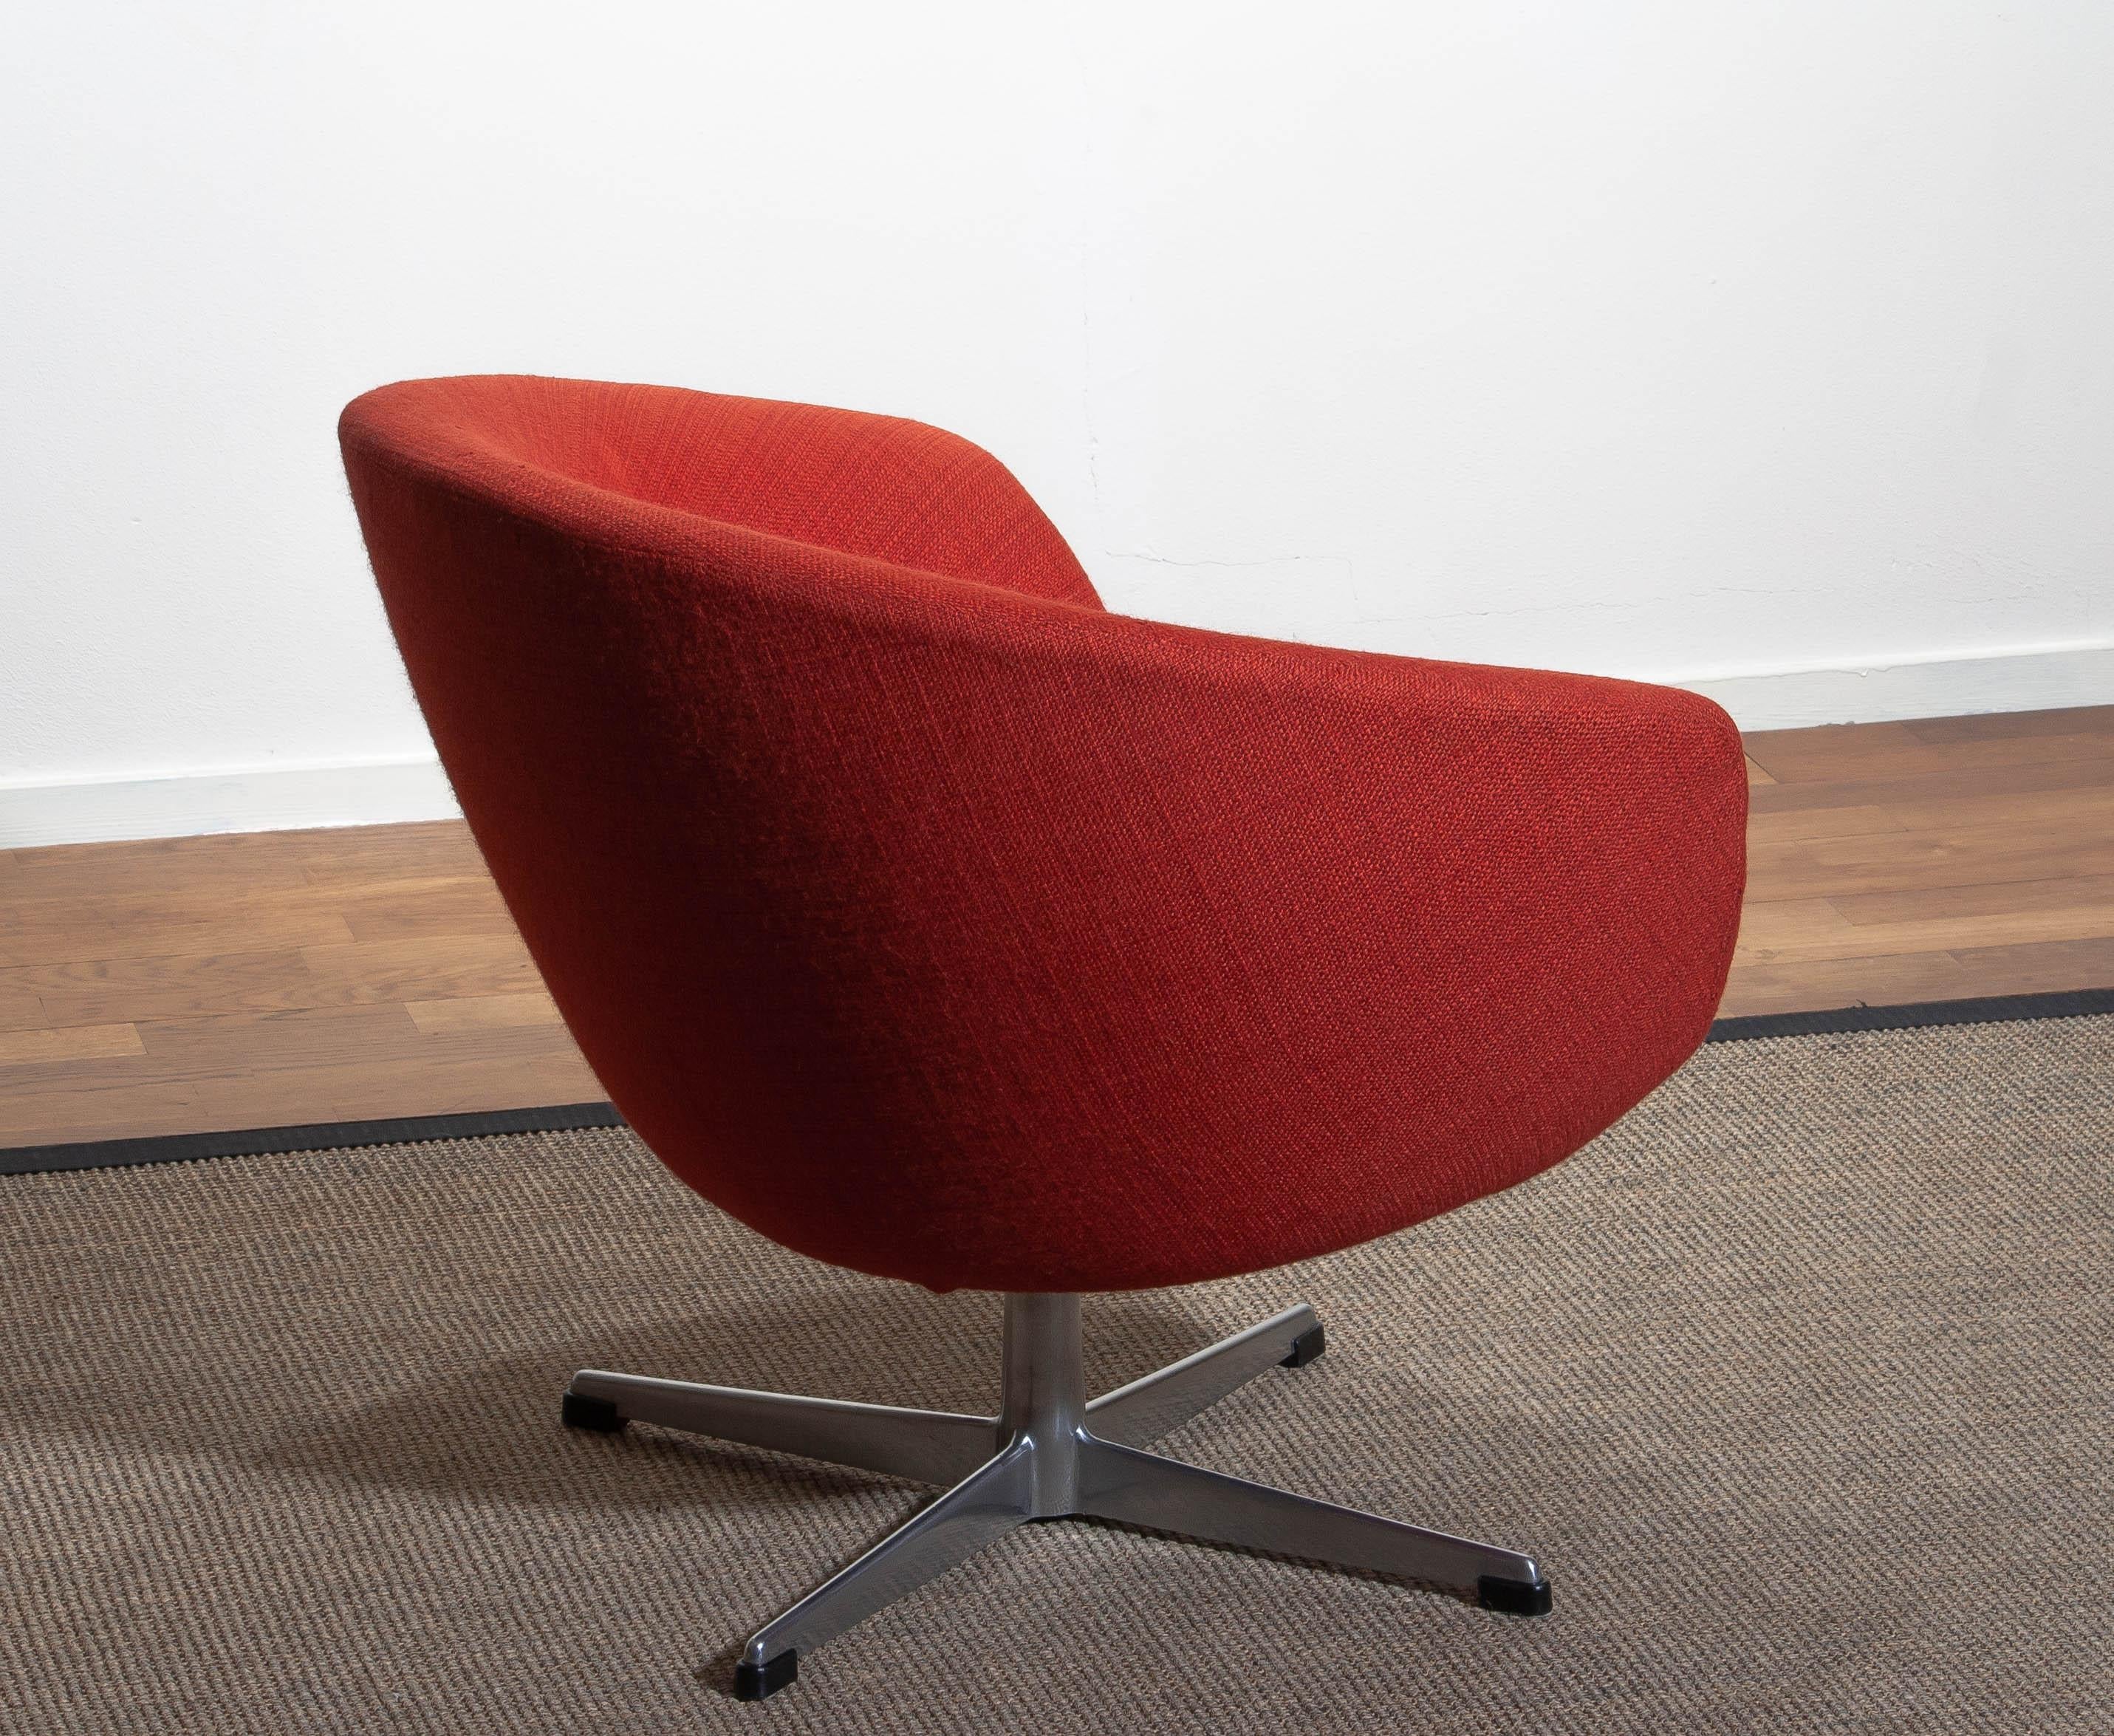 1960s, Swivel Lounge Chair by Carl Eric Klote for Overman, Denmark 1